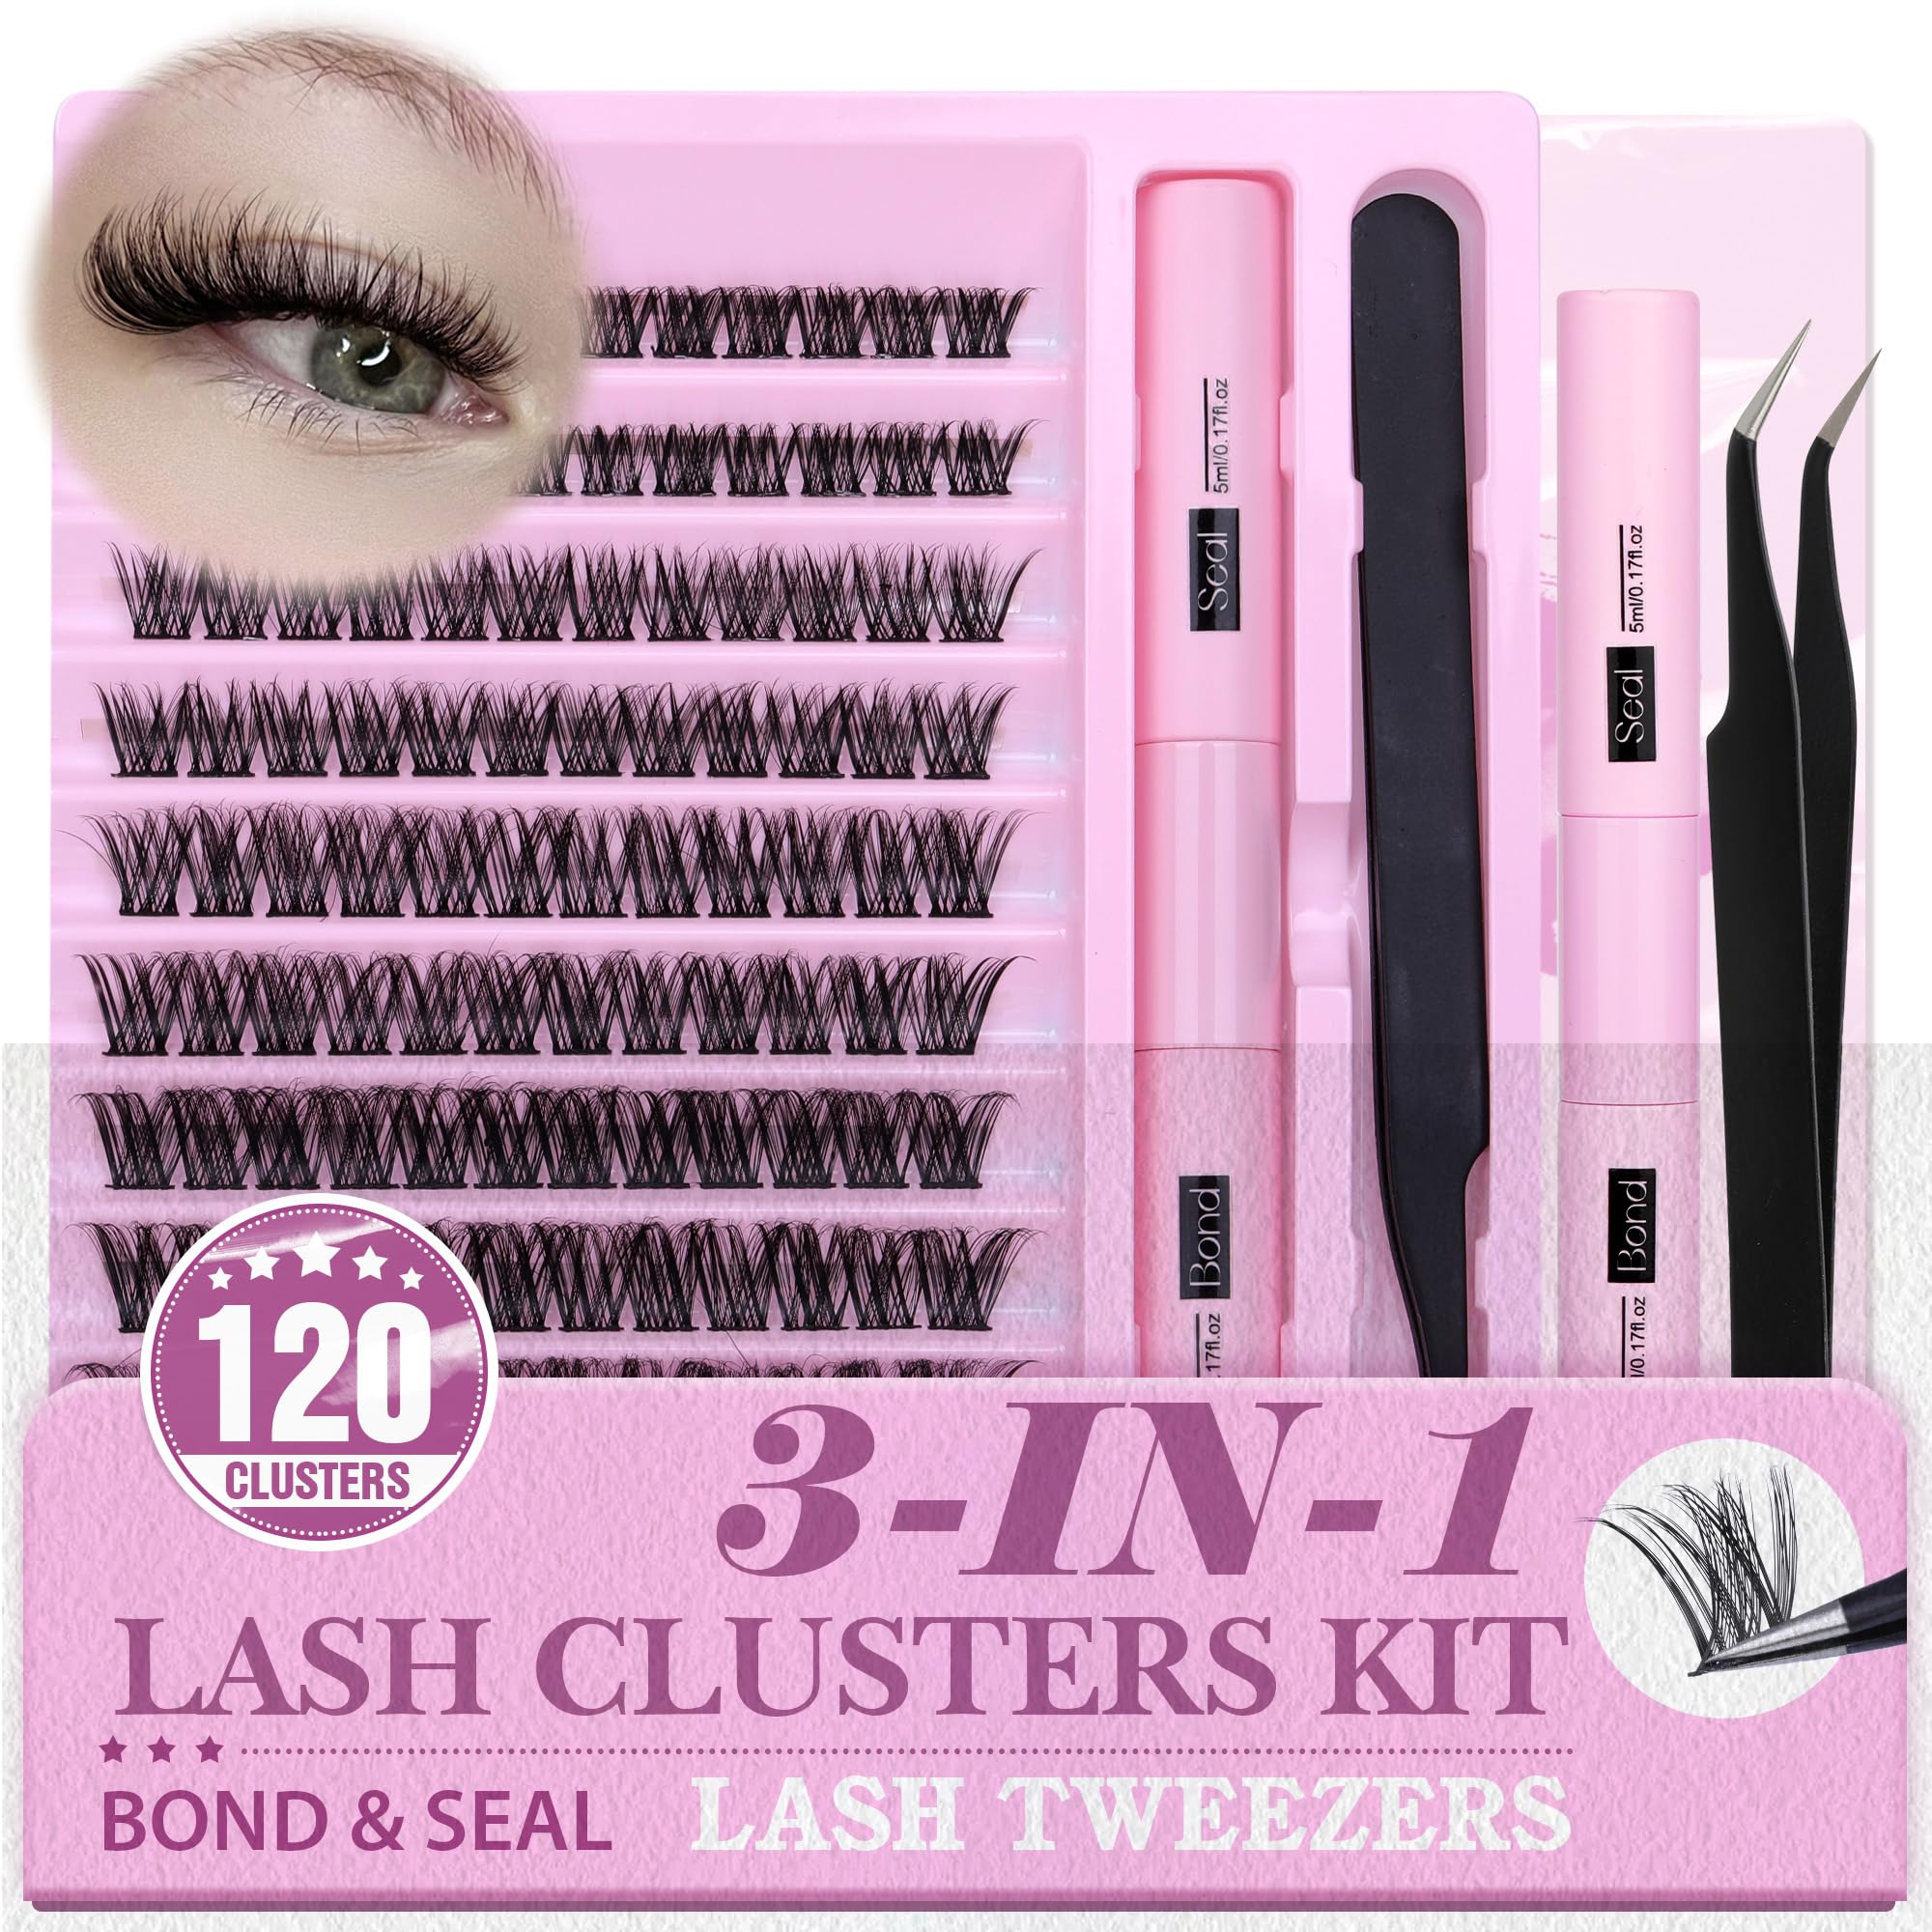 Lash Extension Kit 120 Pcs Lash Clusters DIY Eyelash Extension with Waterproof Lash Bond and Seal and Lash Applicator for Individual Cluster Lashes Extensions Kit by ALPHONSE (8-16MM)